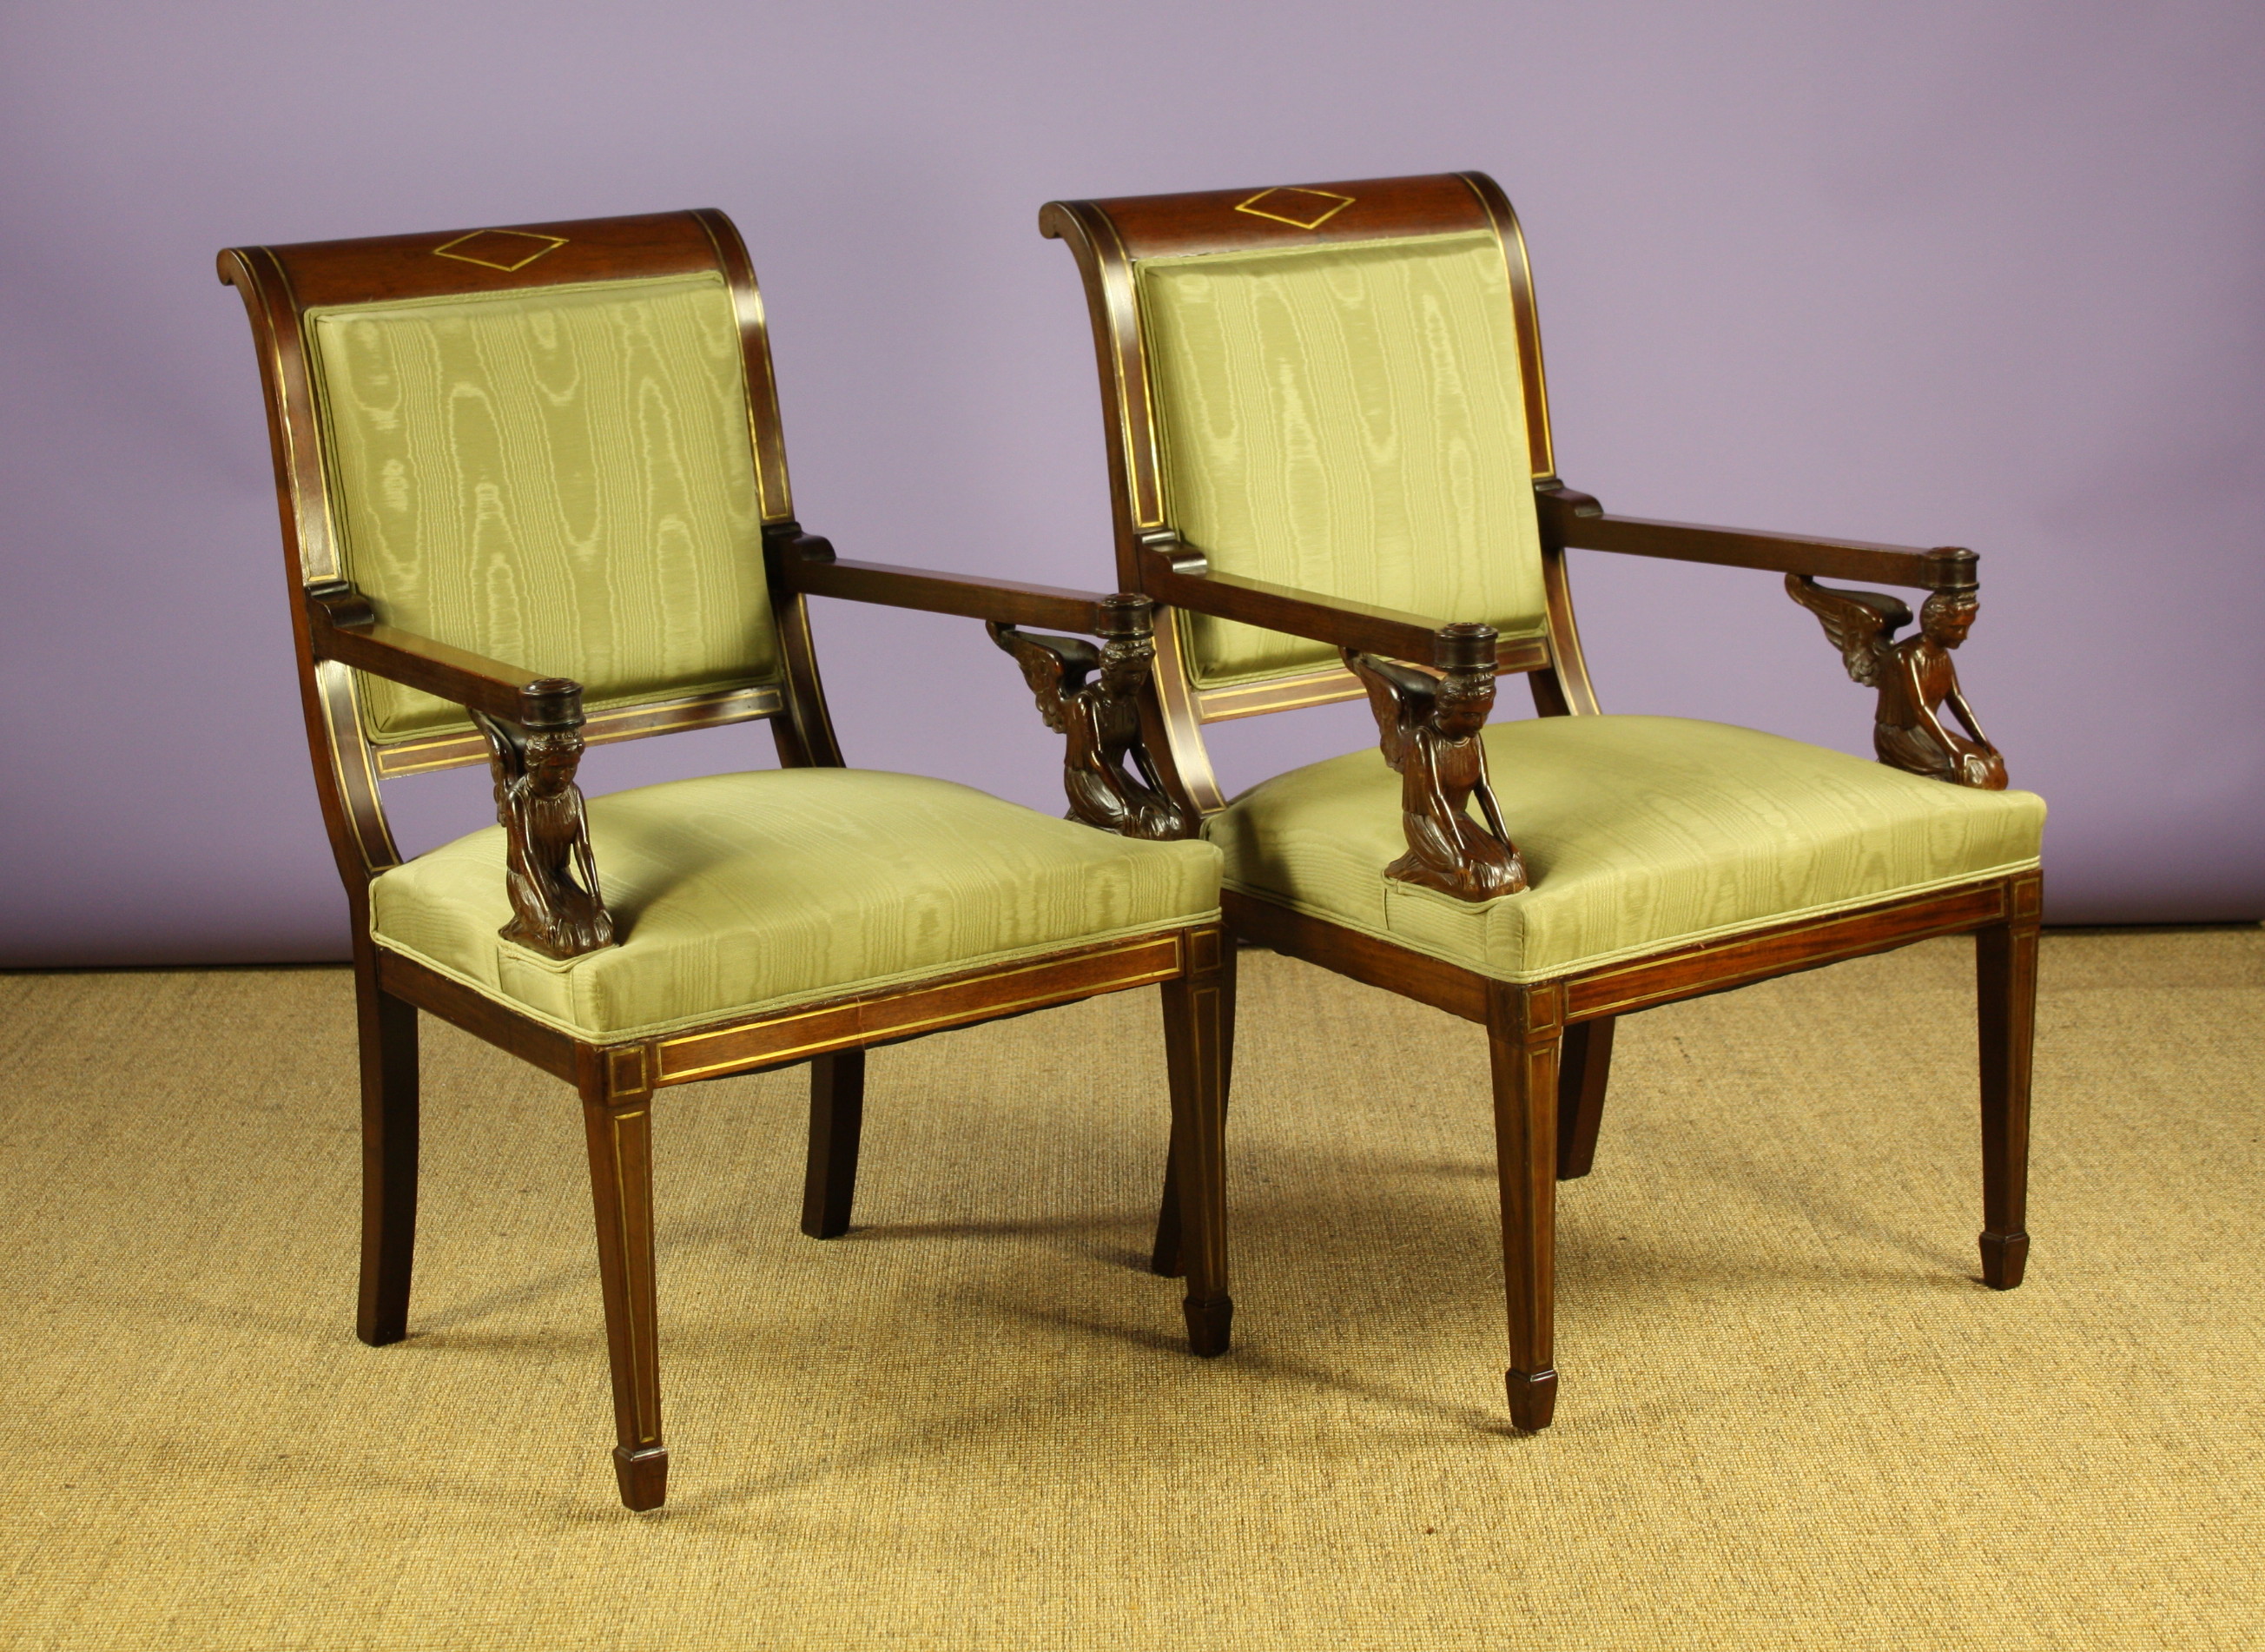 A Pair of Empire Style Mahogany Arm Chairs inlaid with brass stringing.  The square padded backs and